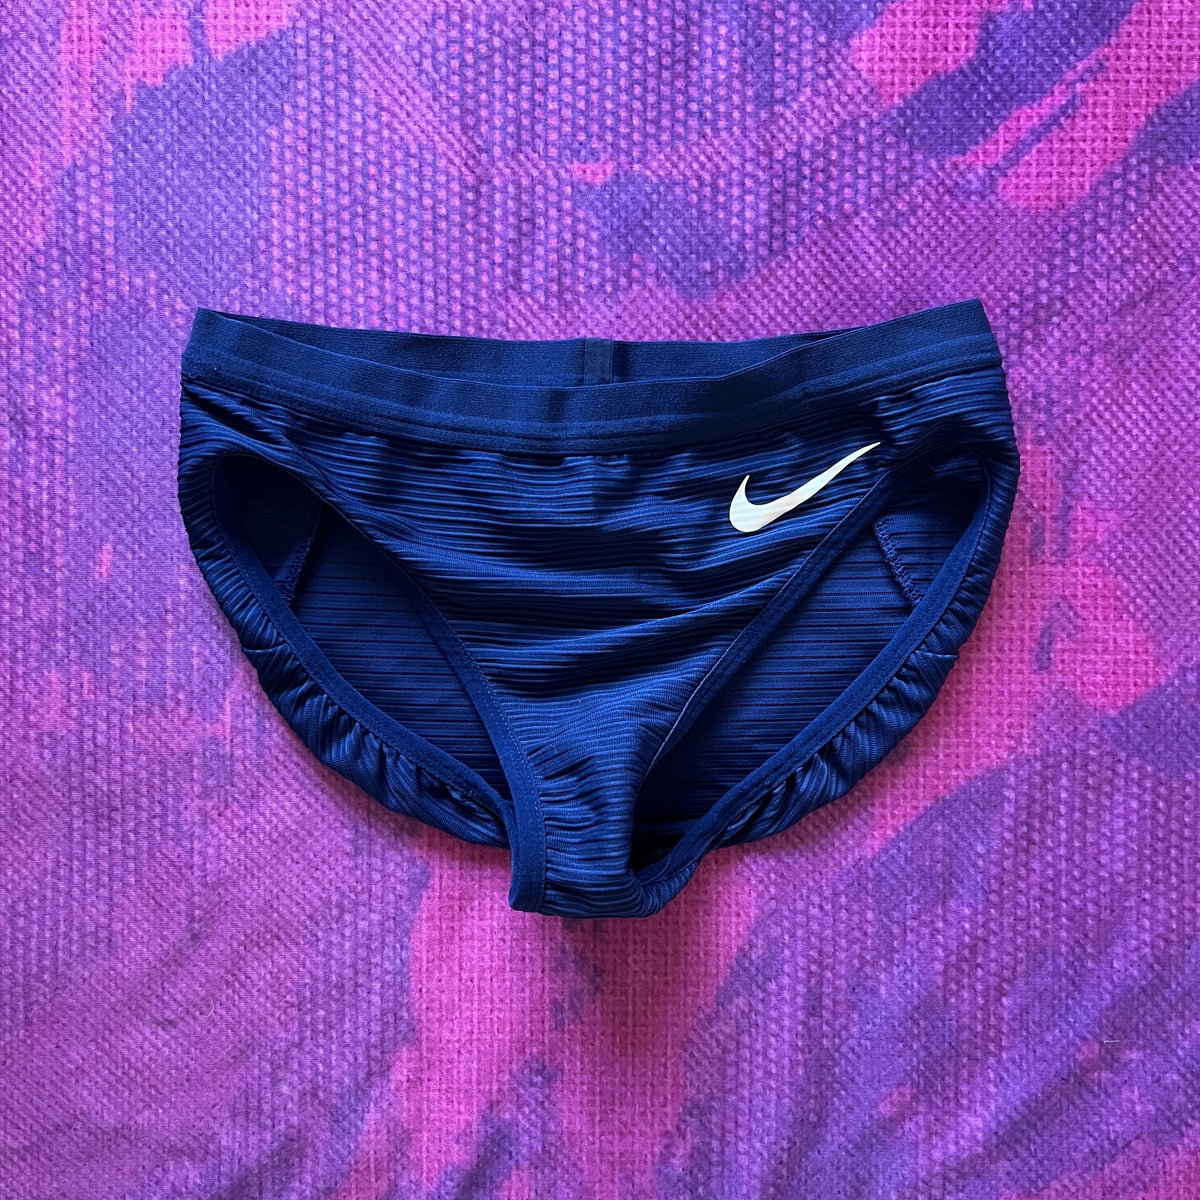 2020/21 Nike Pro Elite Racing Buns (S - Womens) – Bell Lap Track and Field